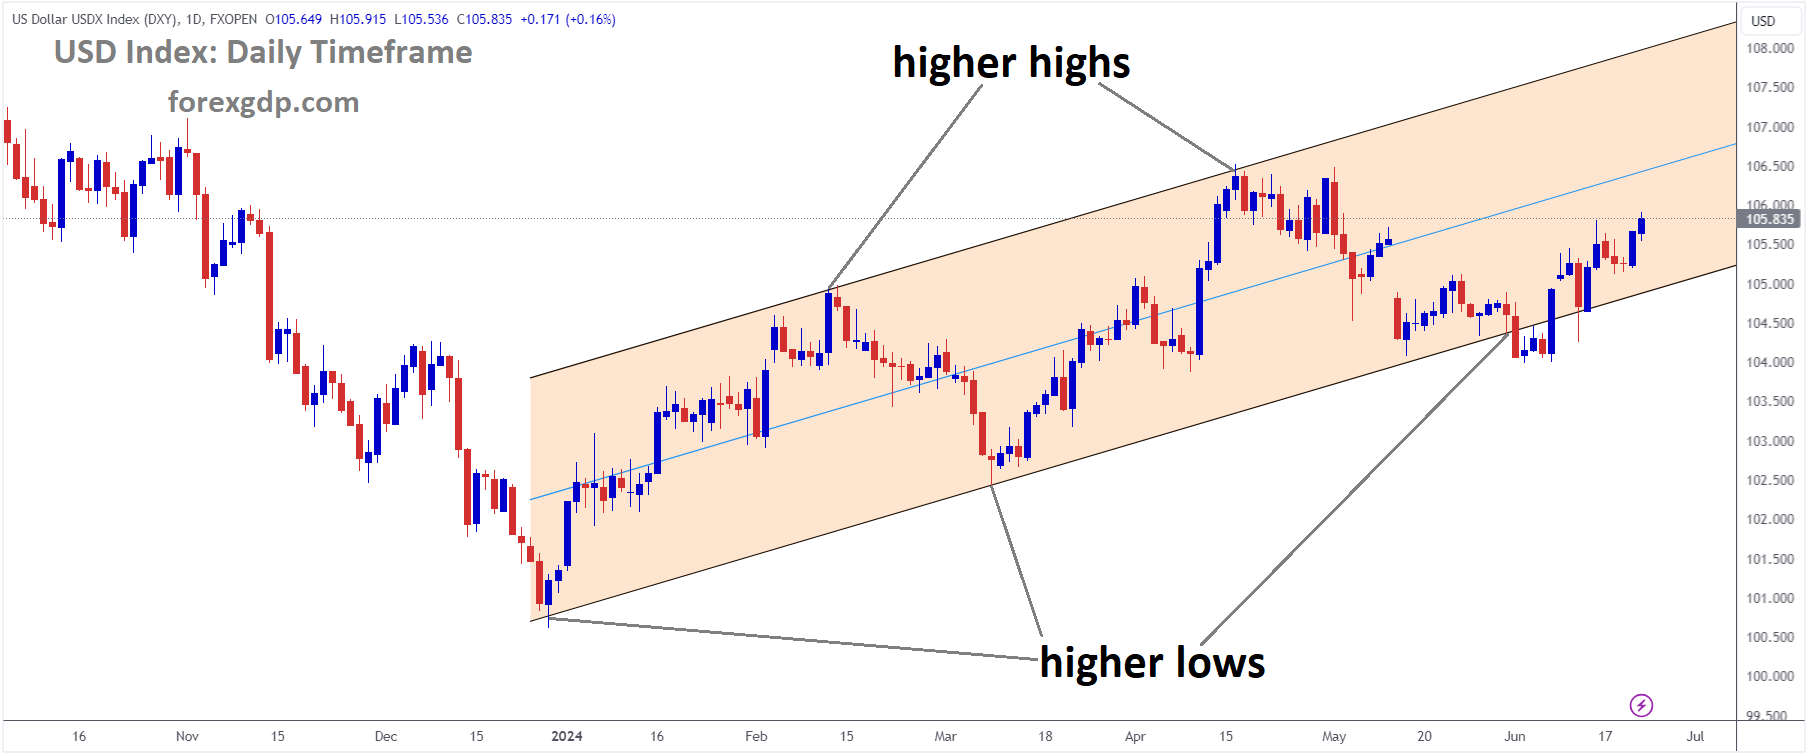 USD Index Market price is moving in Ascending channel and market has rebounded from the higher low area of the channel